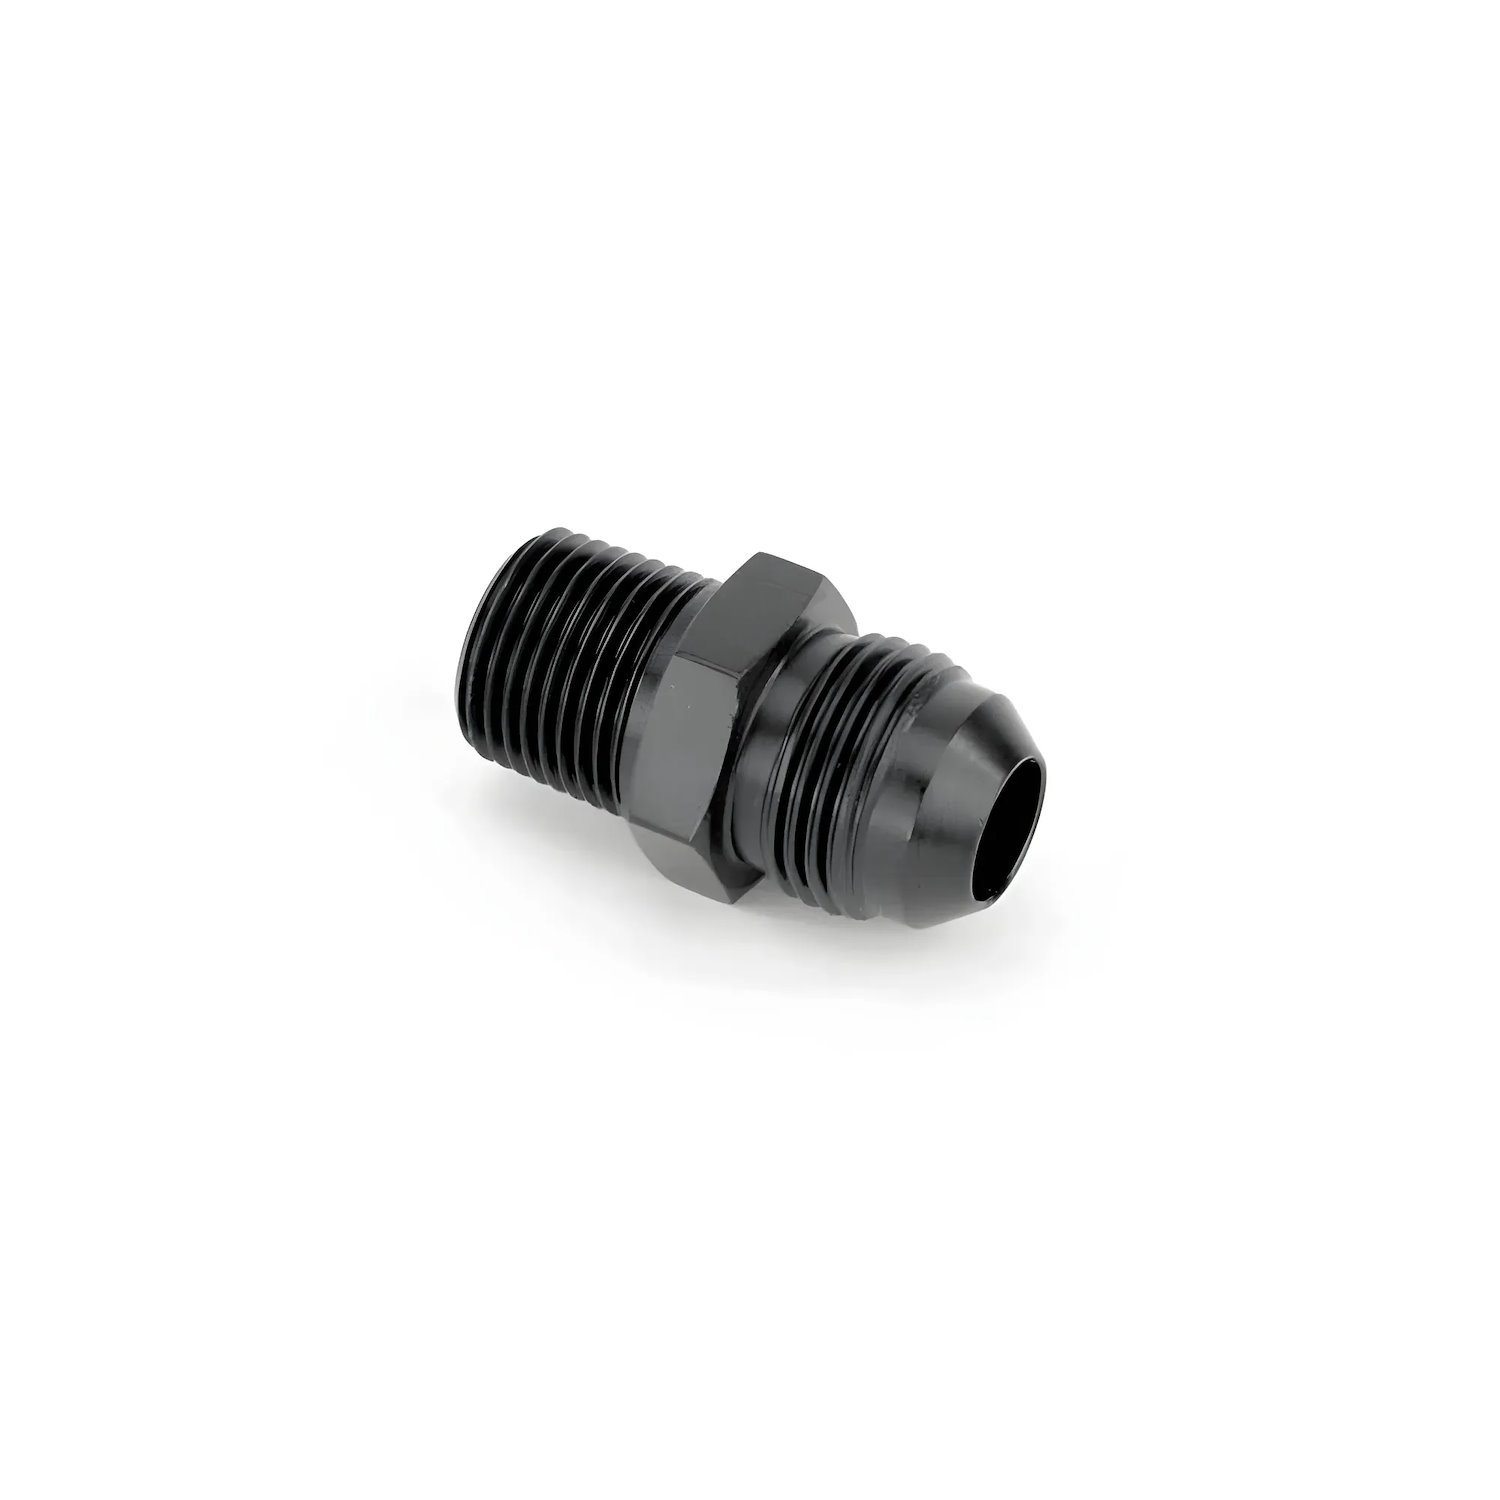 00-01161 3/8 in. NPT x 8AN Straight Fitting- Male/Male, Black